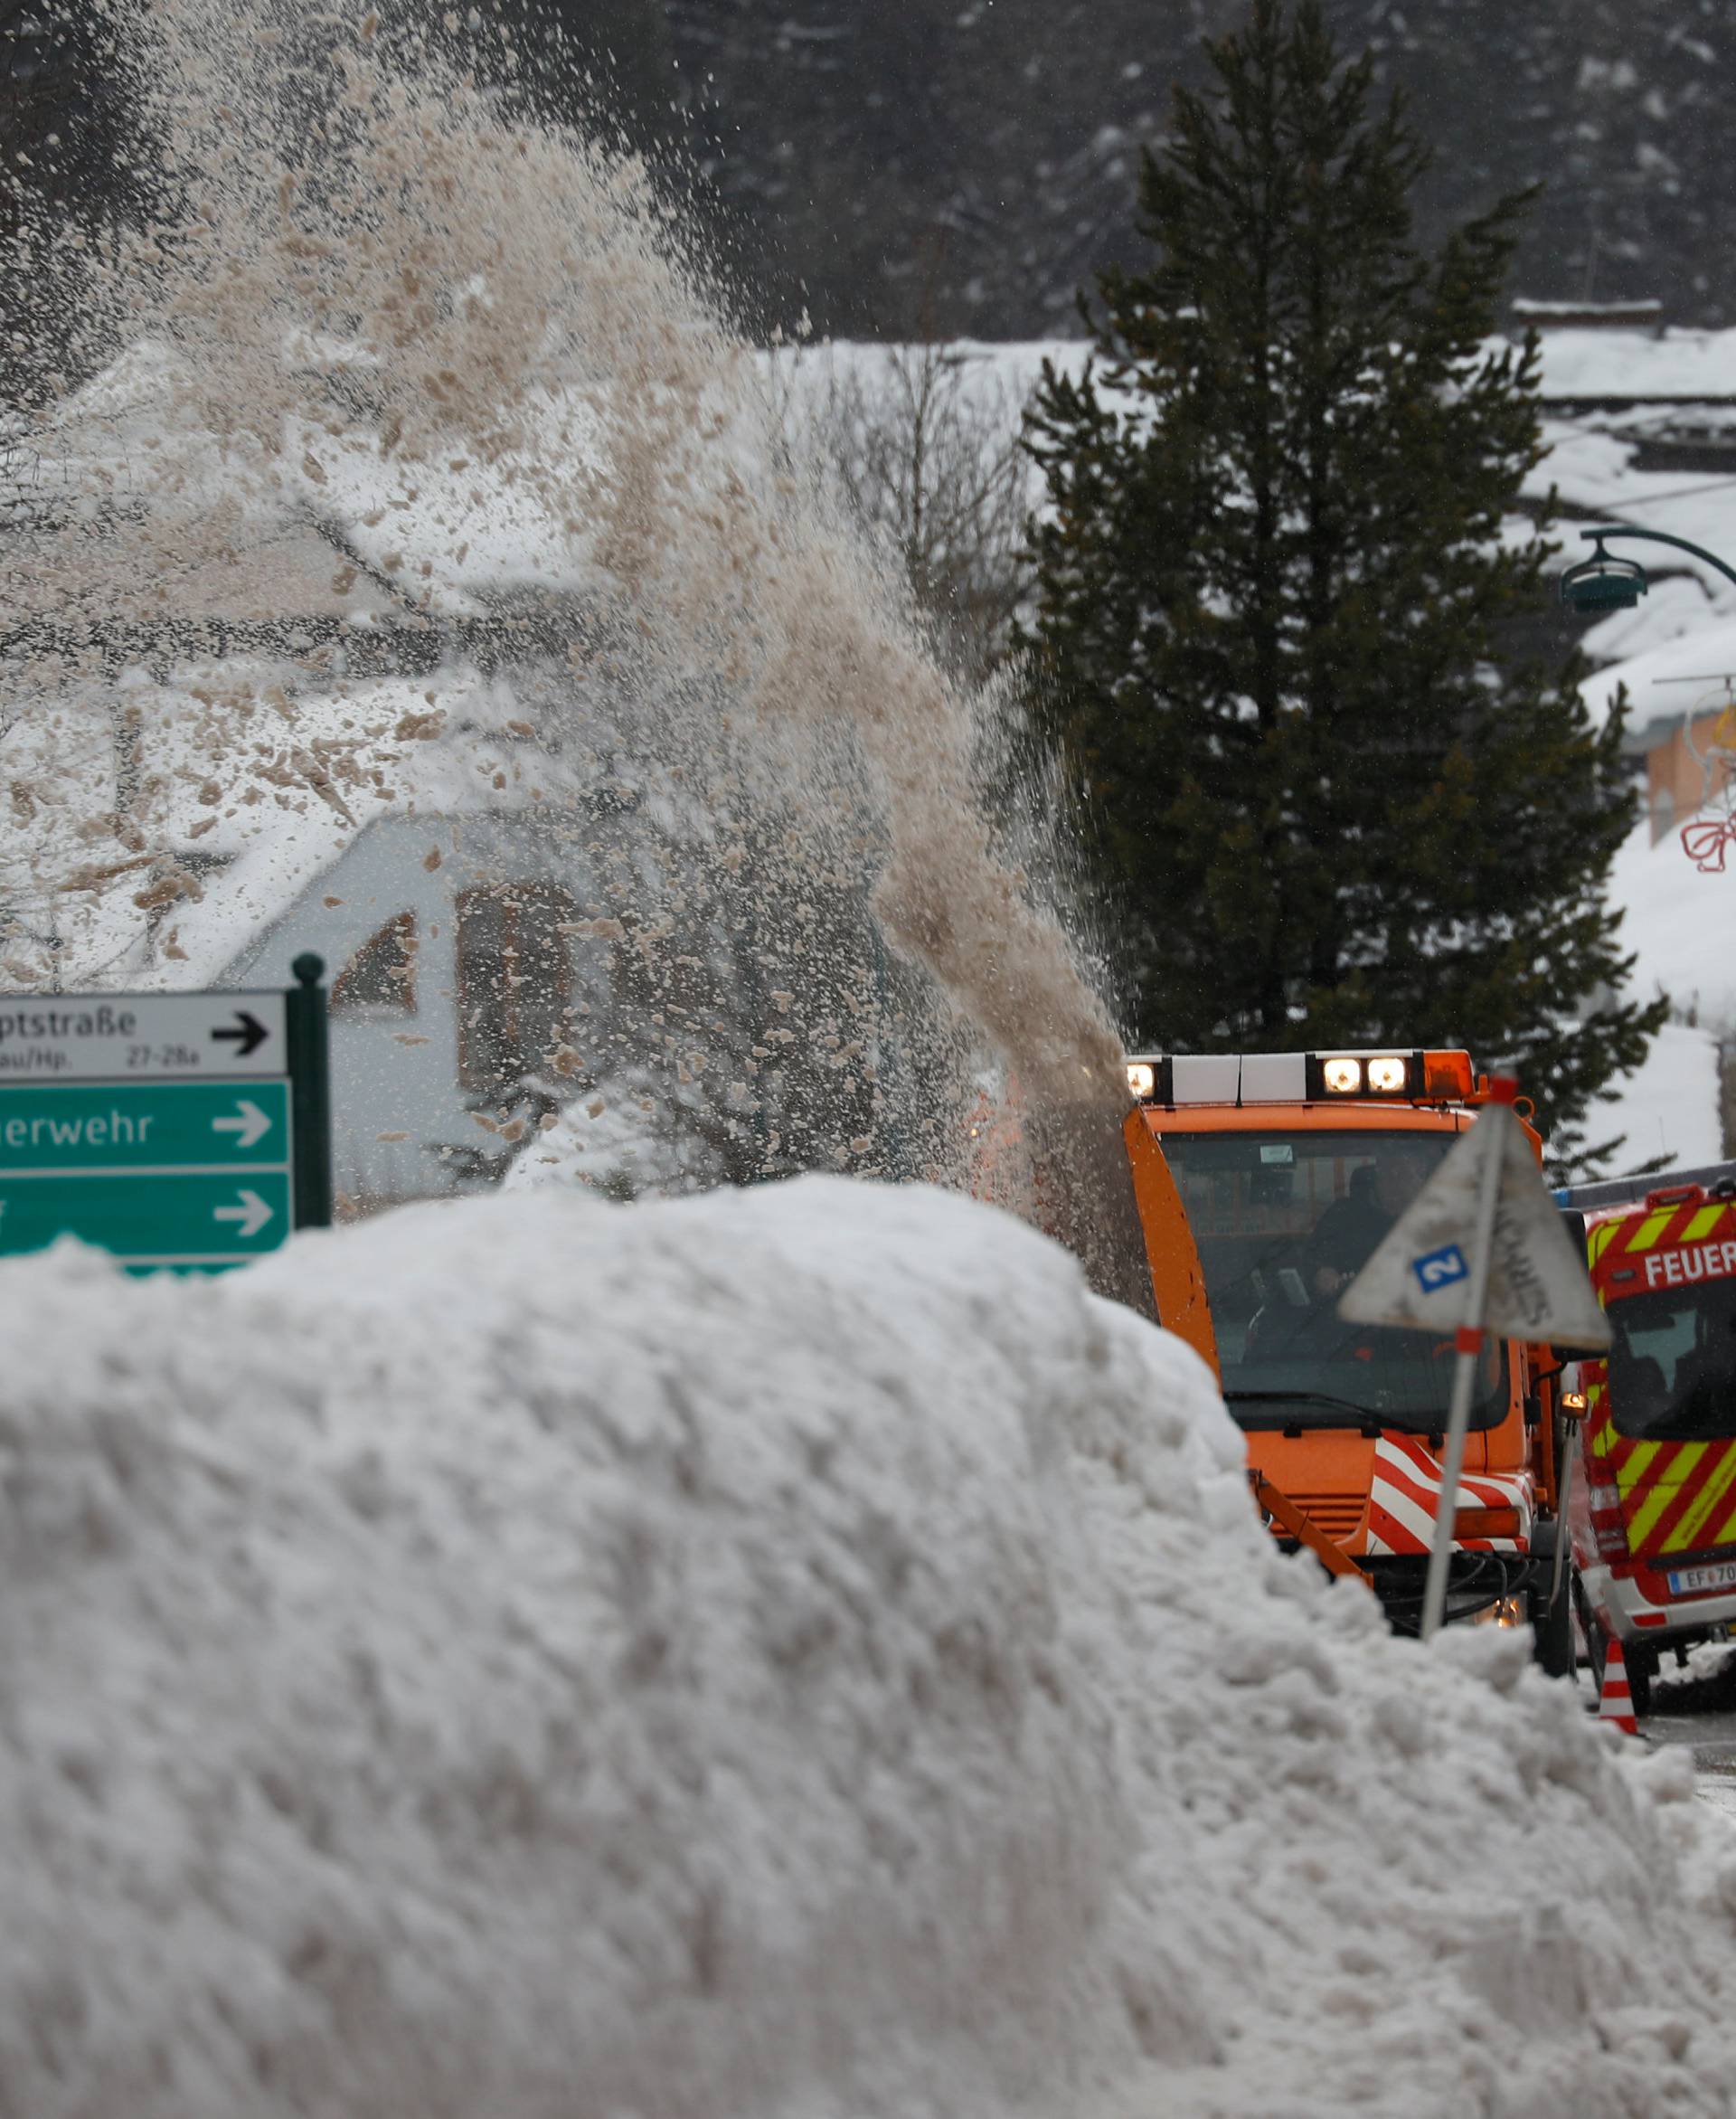 A vehicle removes snow on a road after heavy snowfall in Rosenau